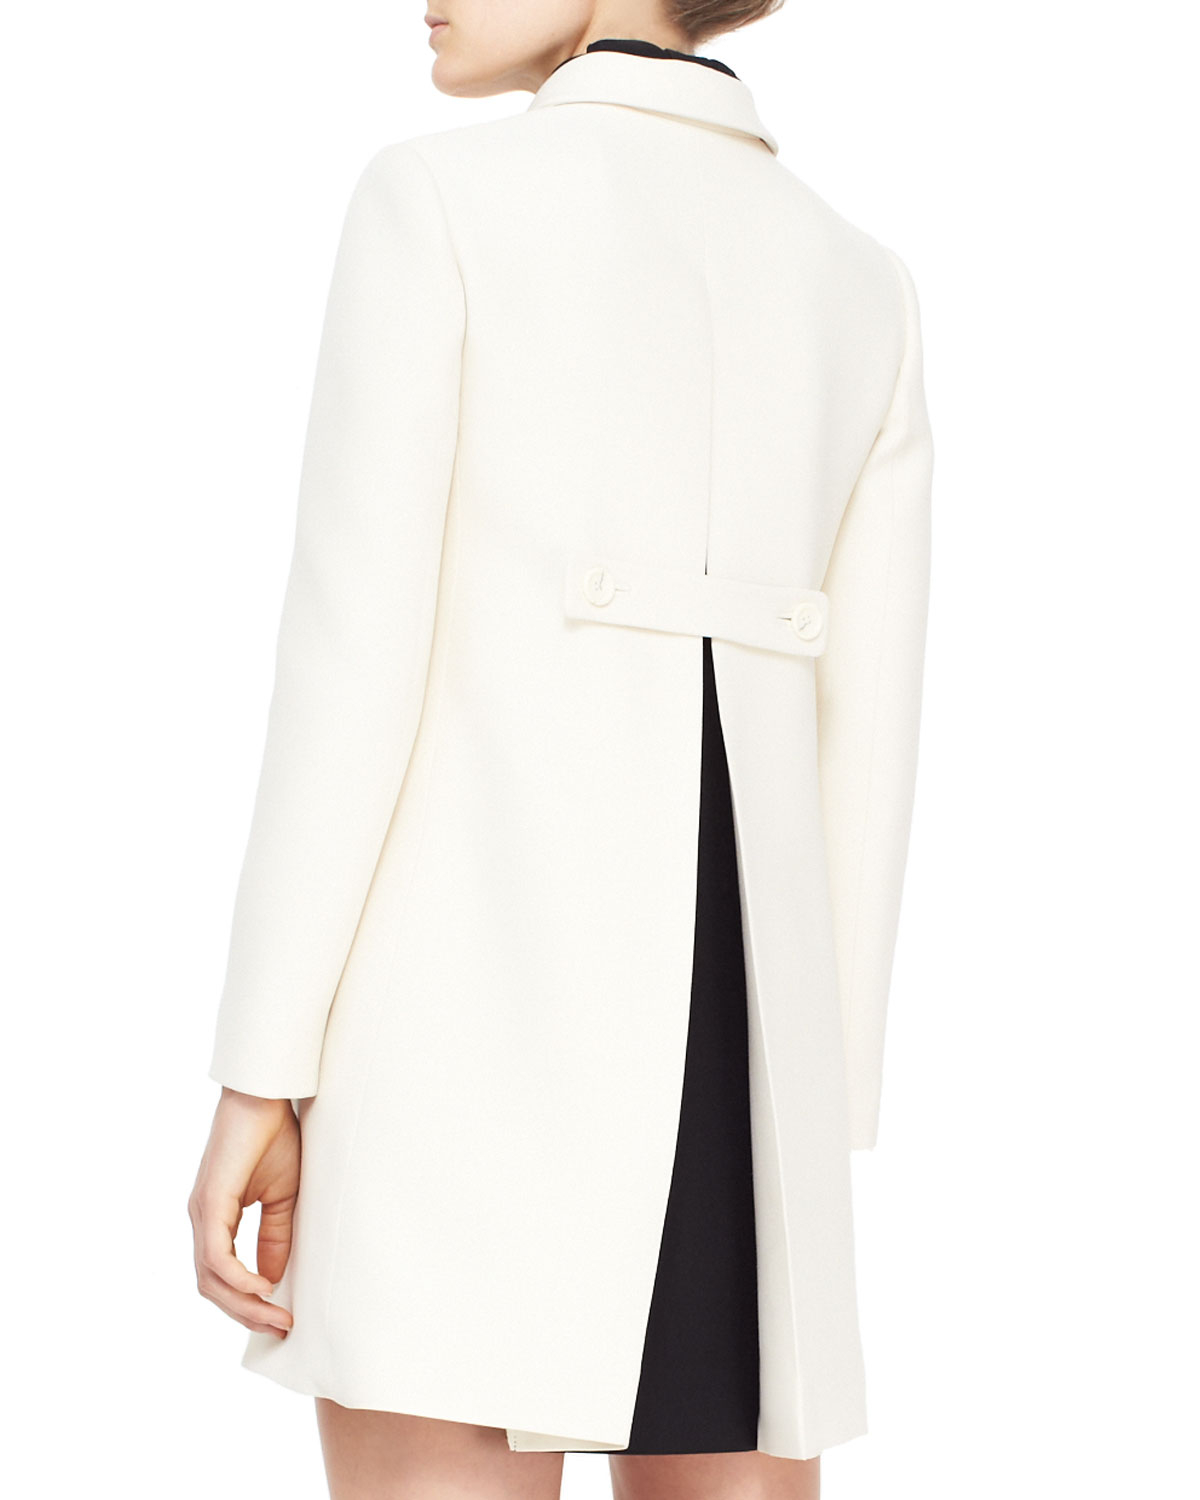 Lyst - Valentino Contrast-Back-Pleat Wool-Silk Drill Coat in White